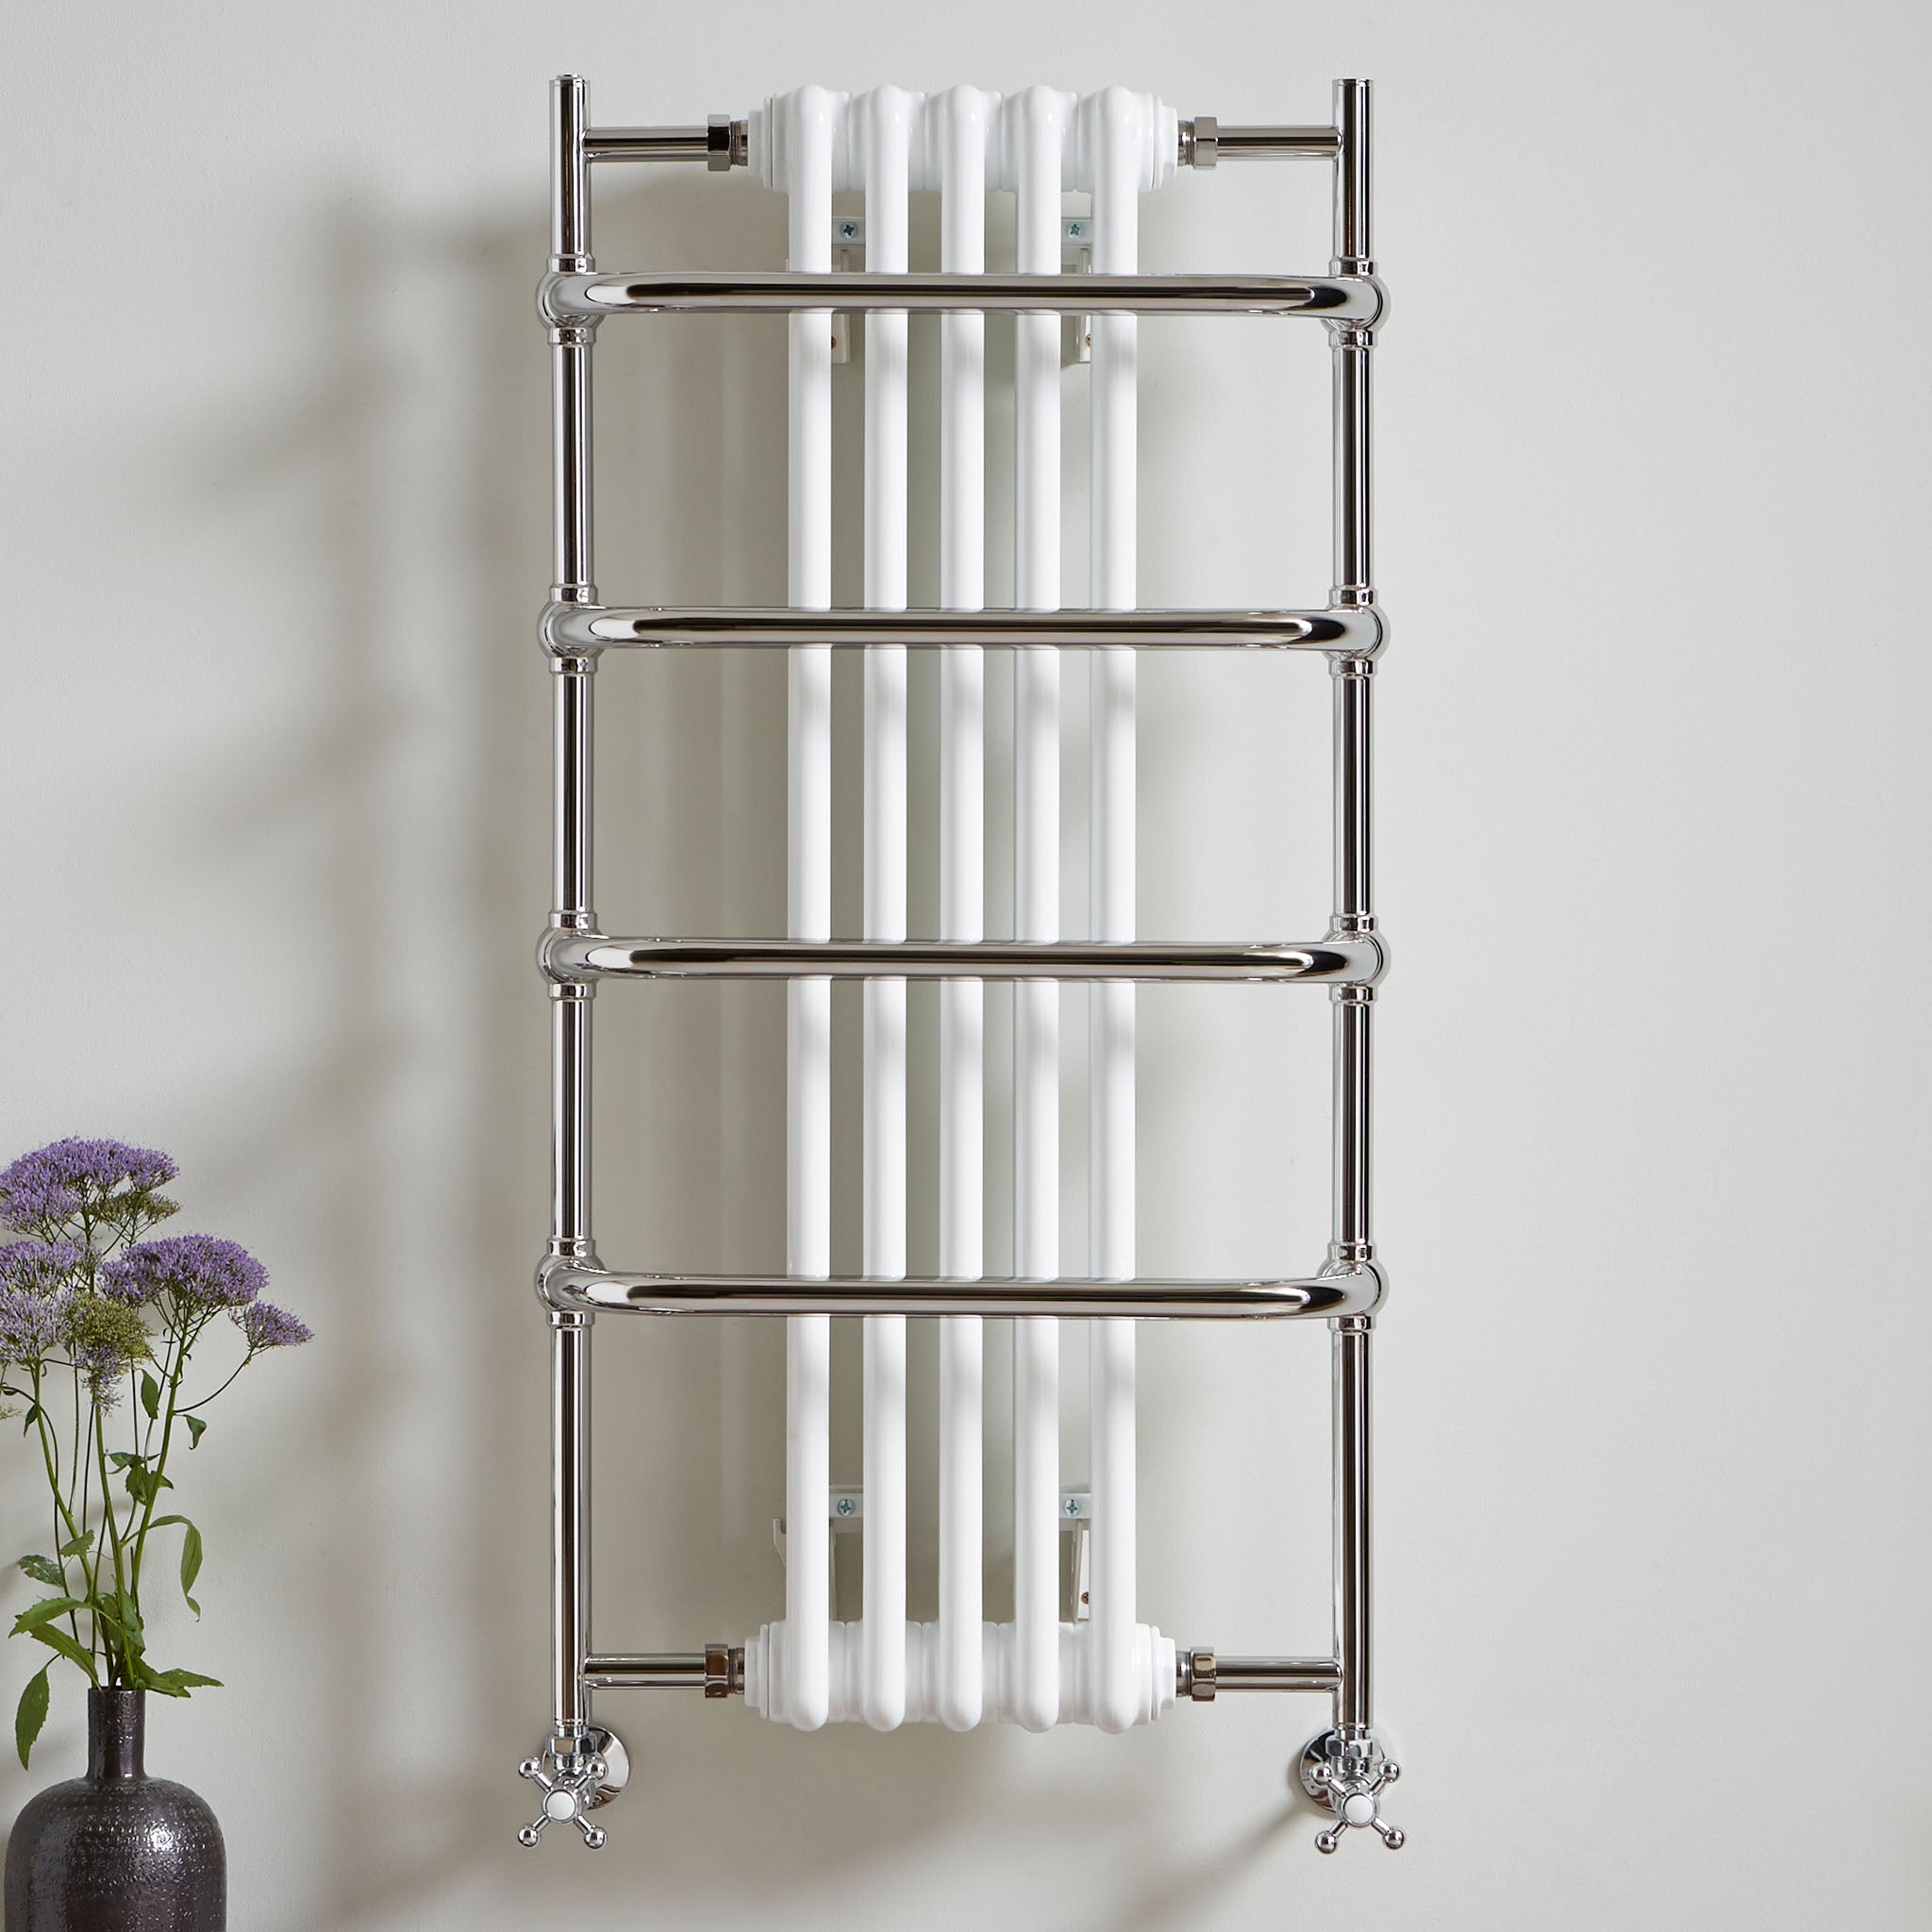 Vogue Sequel V Wall Mounted Heated Towel Rail 1000 x 525mm